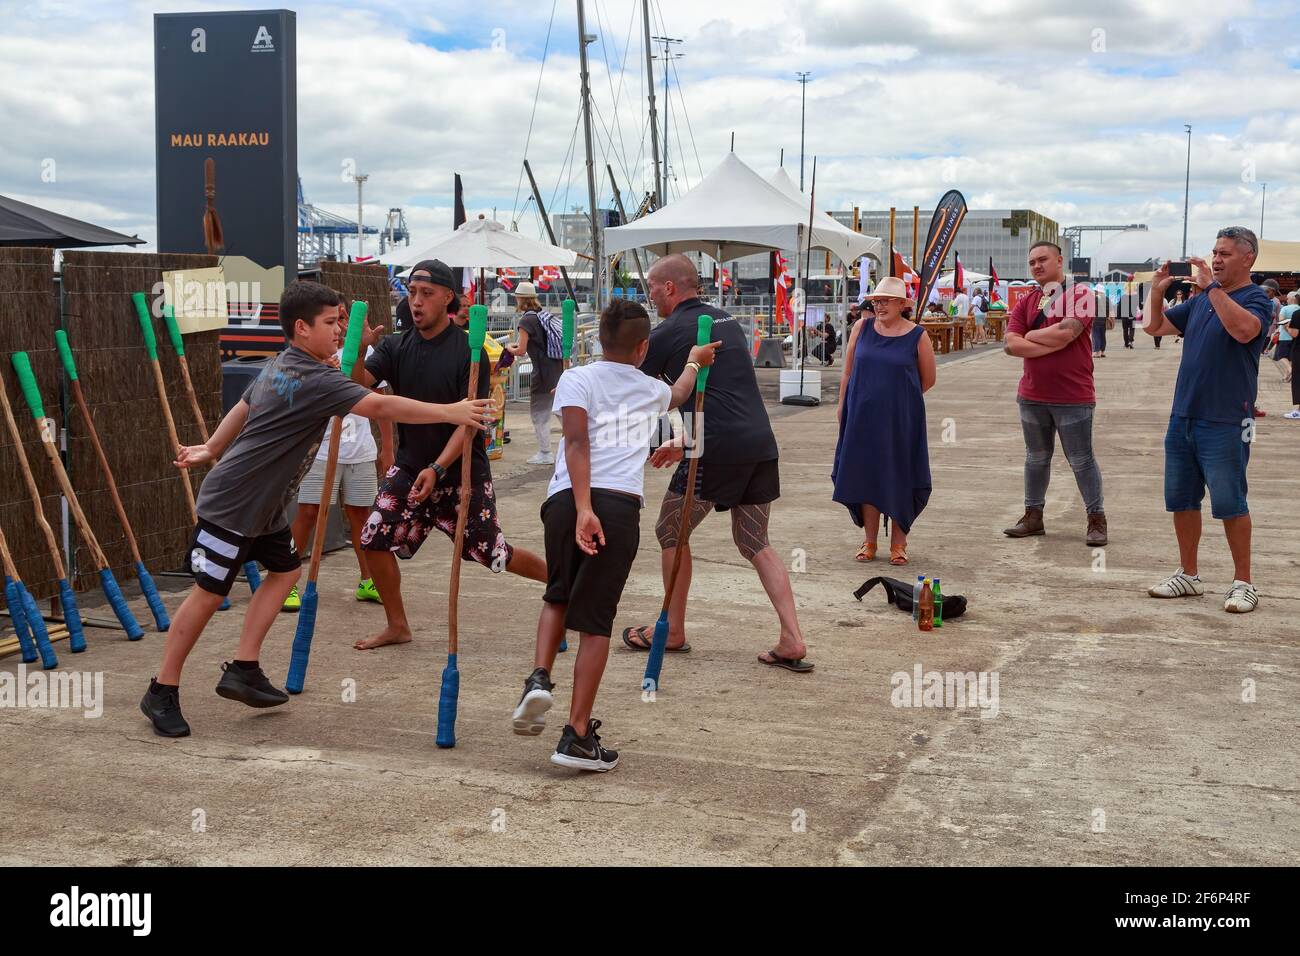 Mau rakau, a Maori martial art / game of skill being practiced in Auckland, New Zealand. The men try to grab the poles before they hit the ground Stock Photo